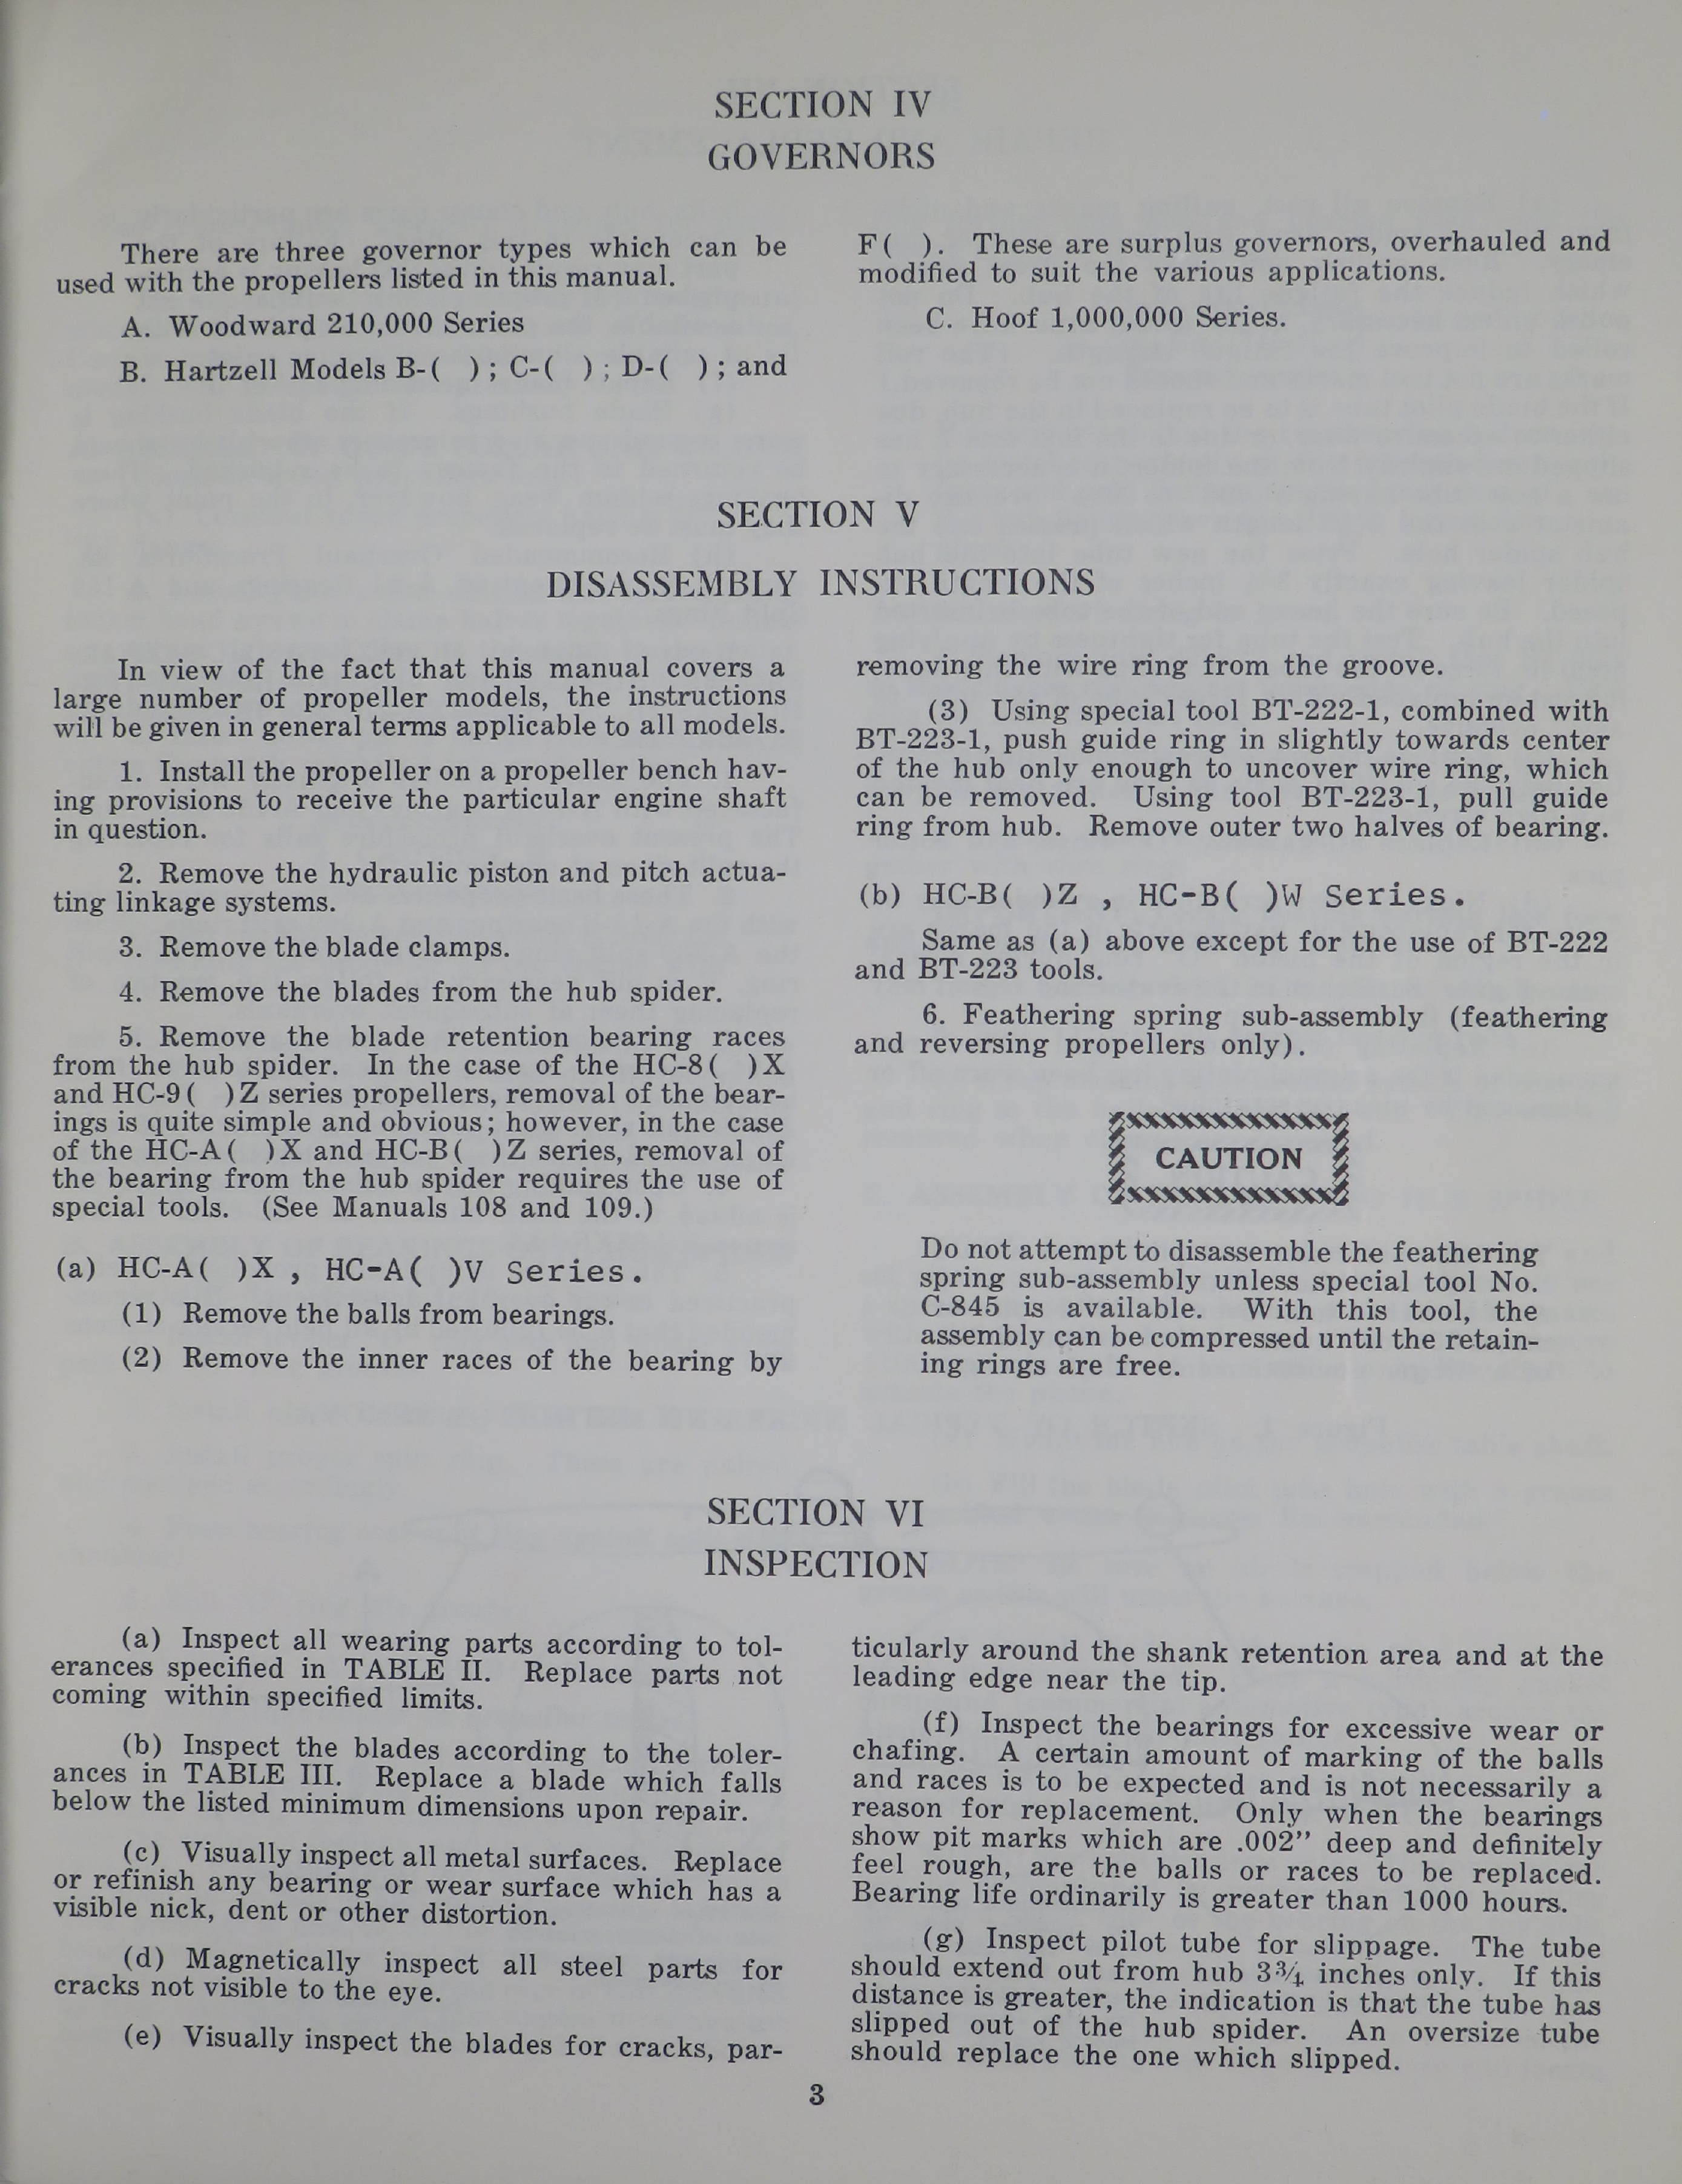 Sample page 7 from AirCorps Library document: Overhaul Instructions for Constant Speed, Feathering and Reversing Hartzell Propellers